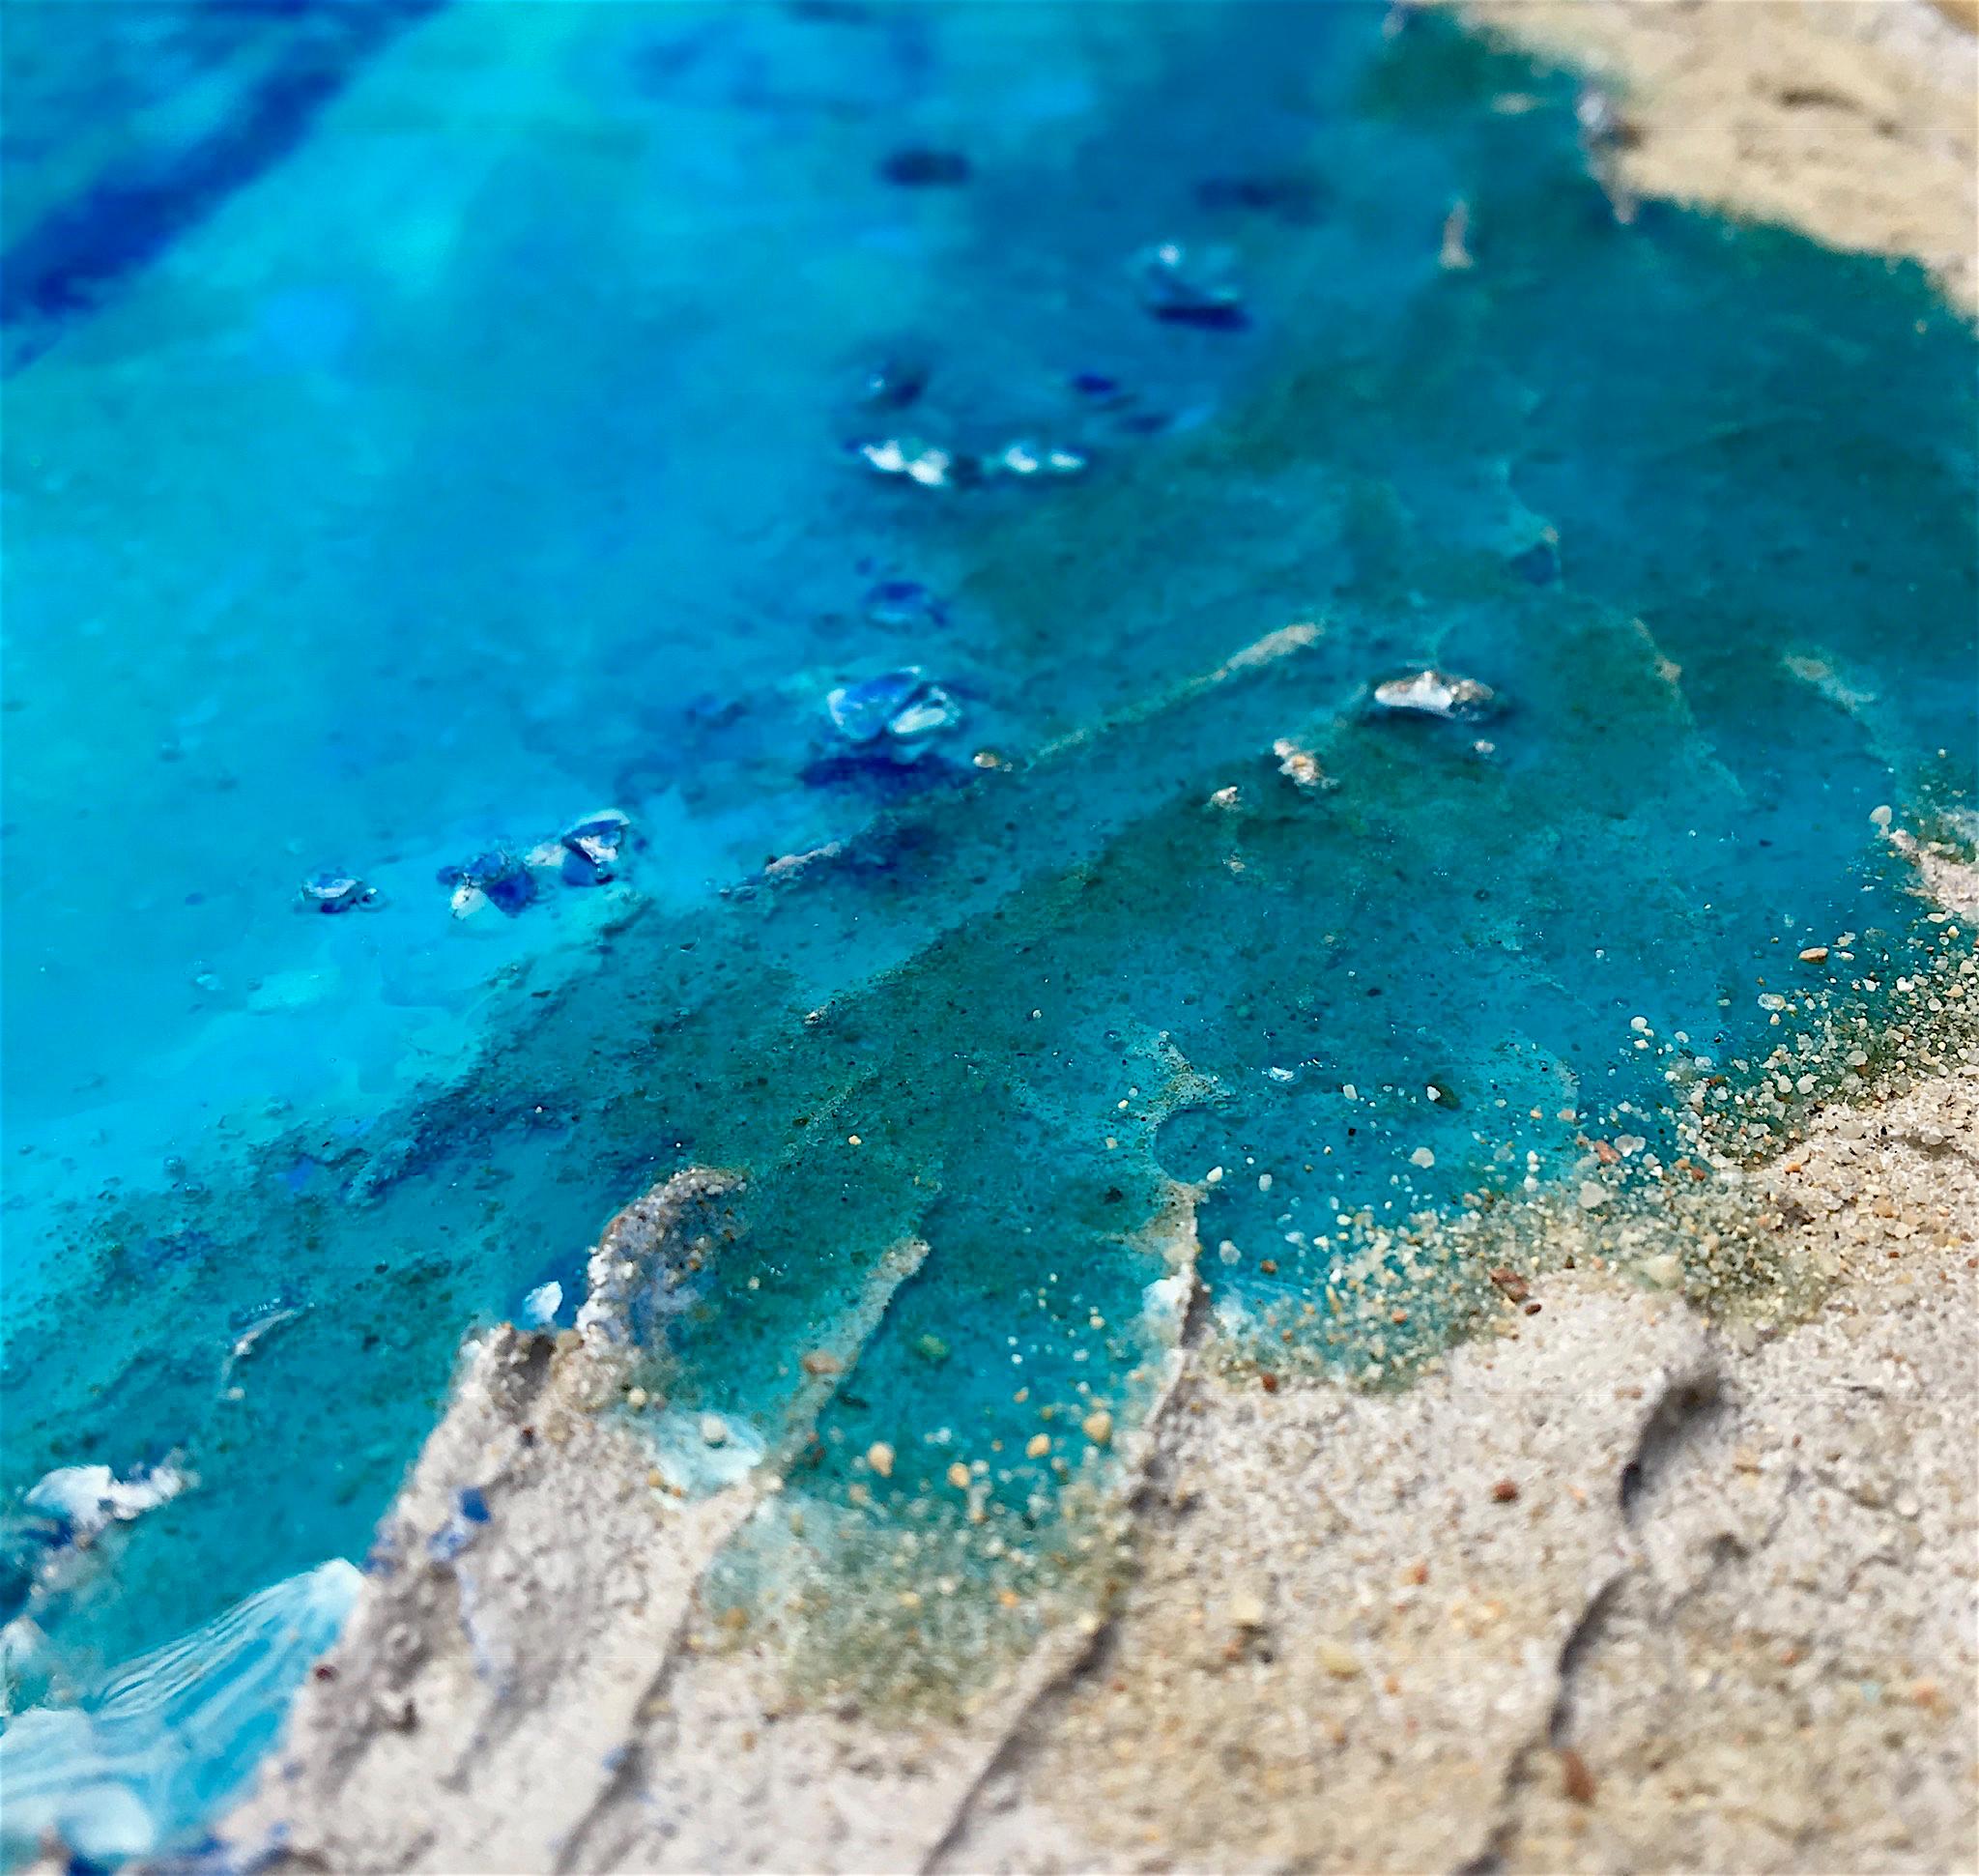 Abstract painting and resin on canvas with heavy texture. 
Acrylic, resin and varnish for protection.
Colours: Blue, Beige and Green.
This painting is called Coastline 1 and numbered 247.
Original and signed by the artist, comes with gallery